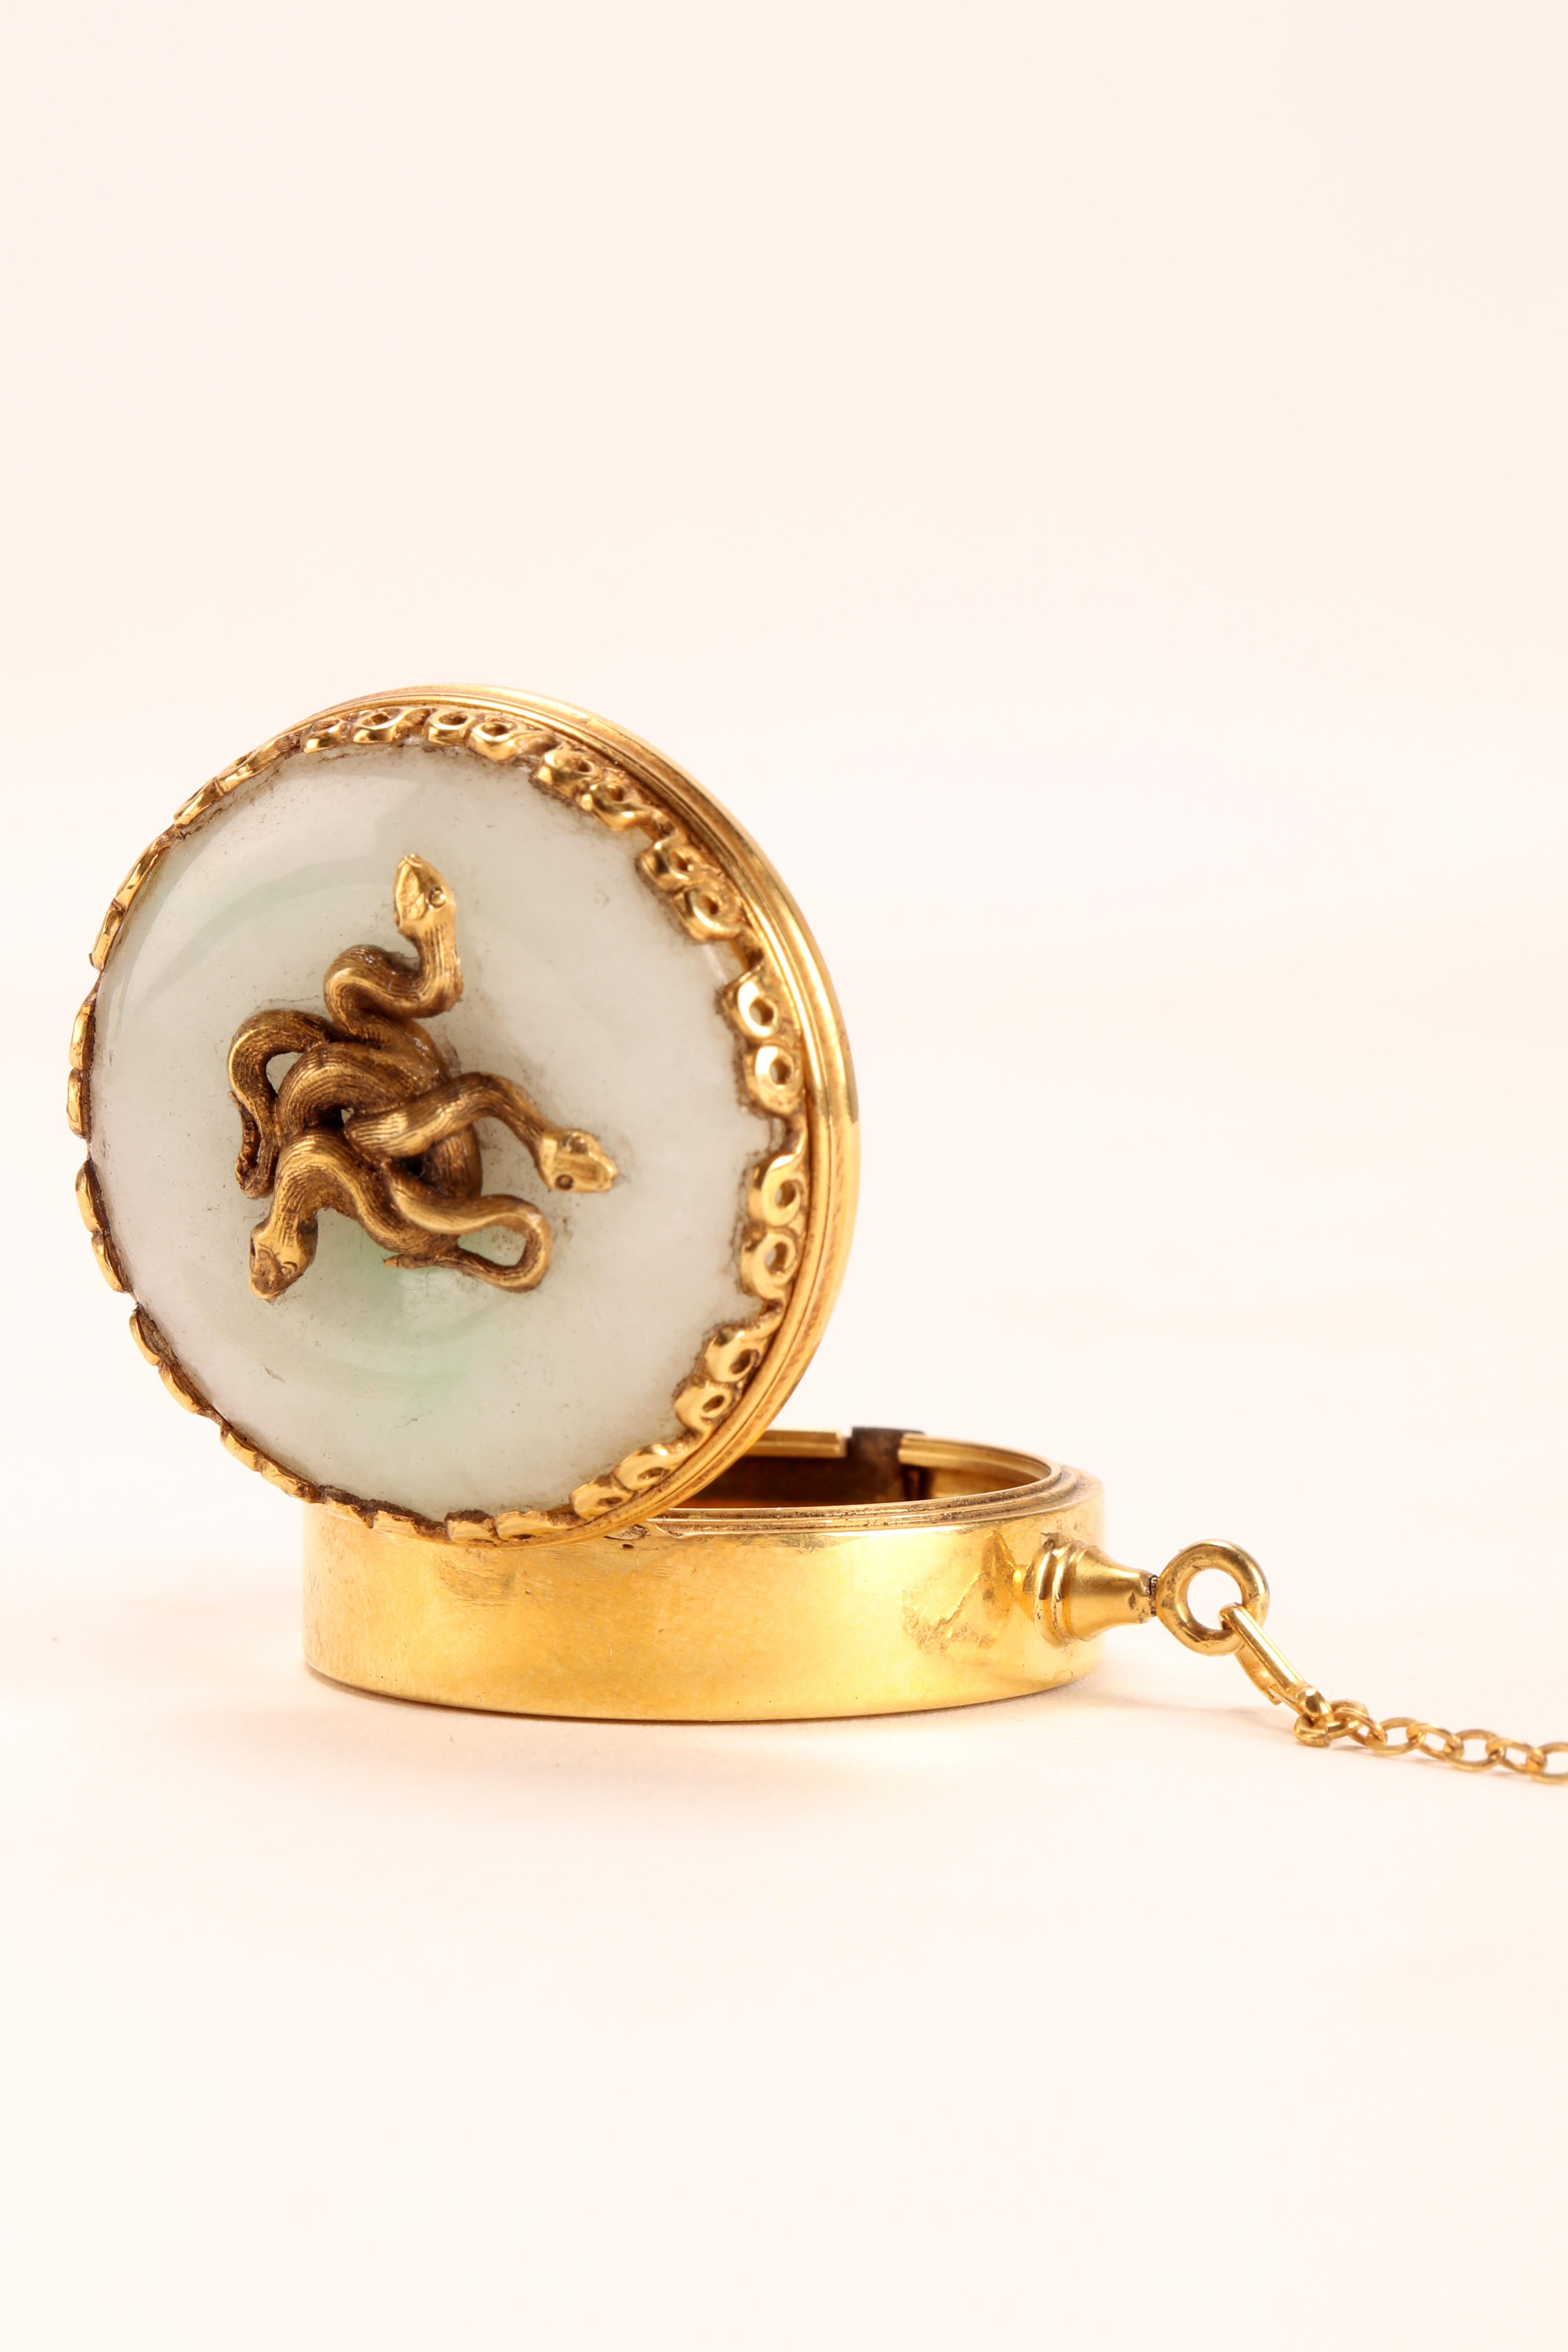 Art Nouveau Gold and Jade Vinaigrette with Snakes, France 1900 For Sale 6